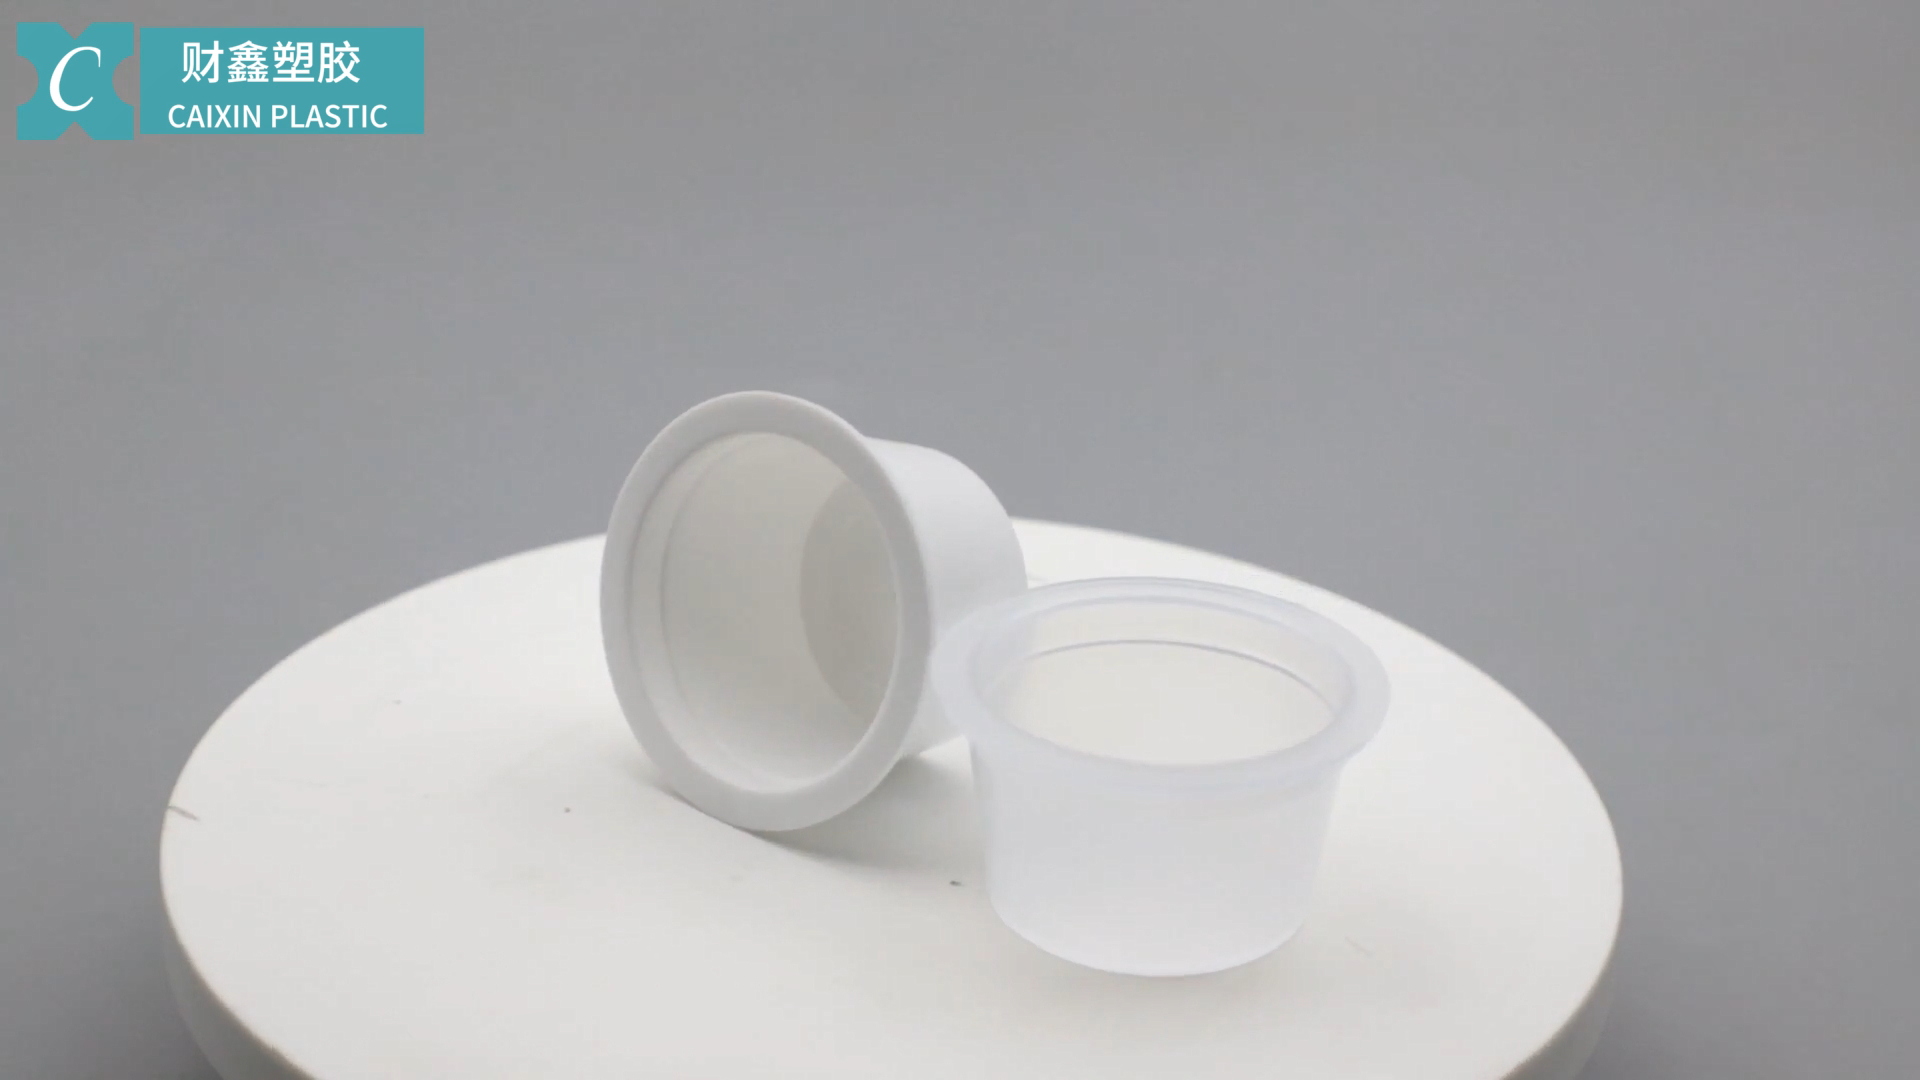  Customized sauce packaging cups manufacturers From China | Caixin Plastic 